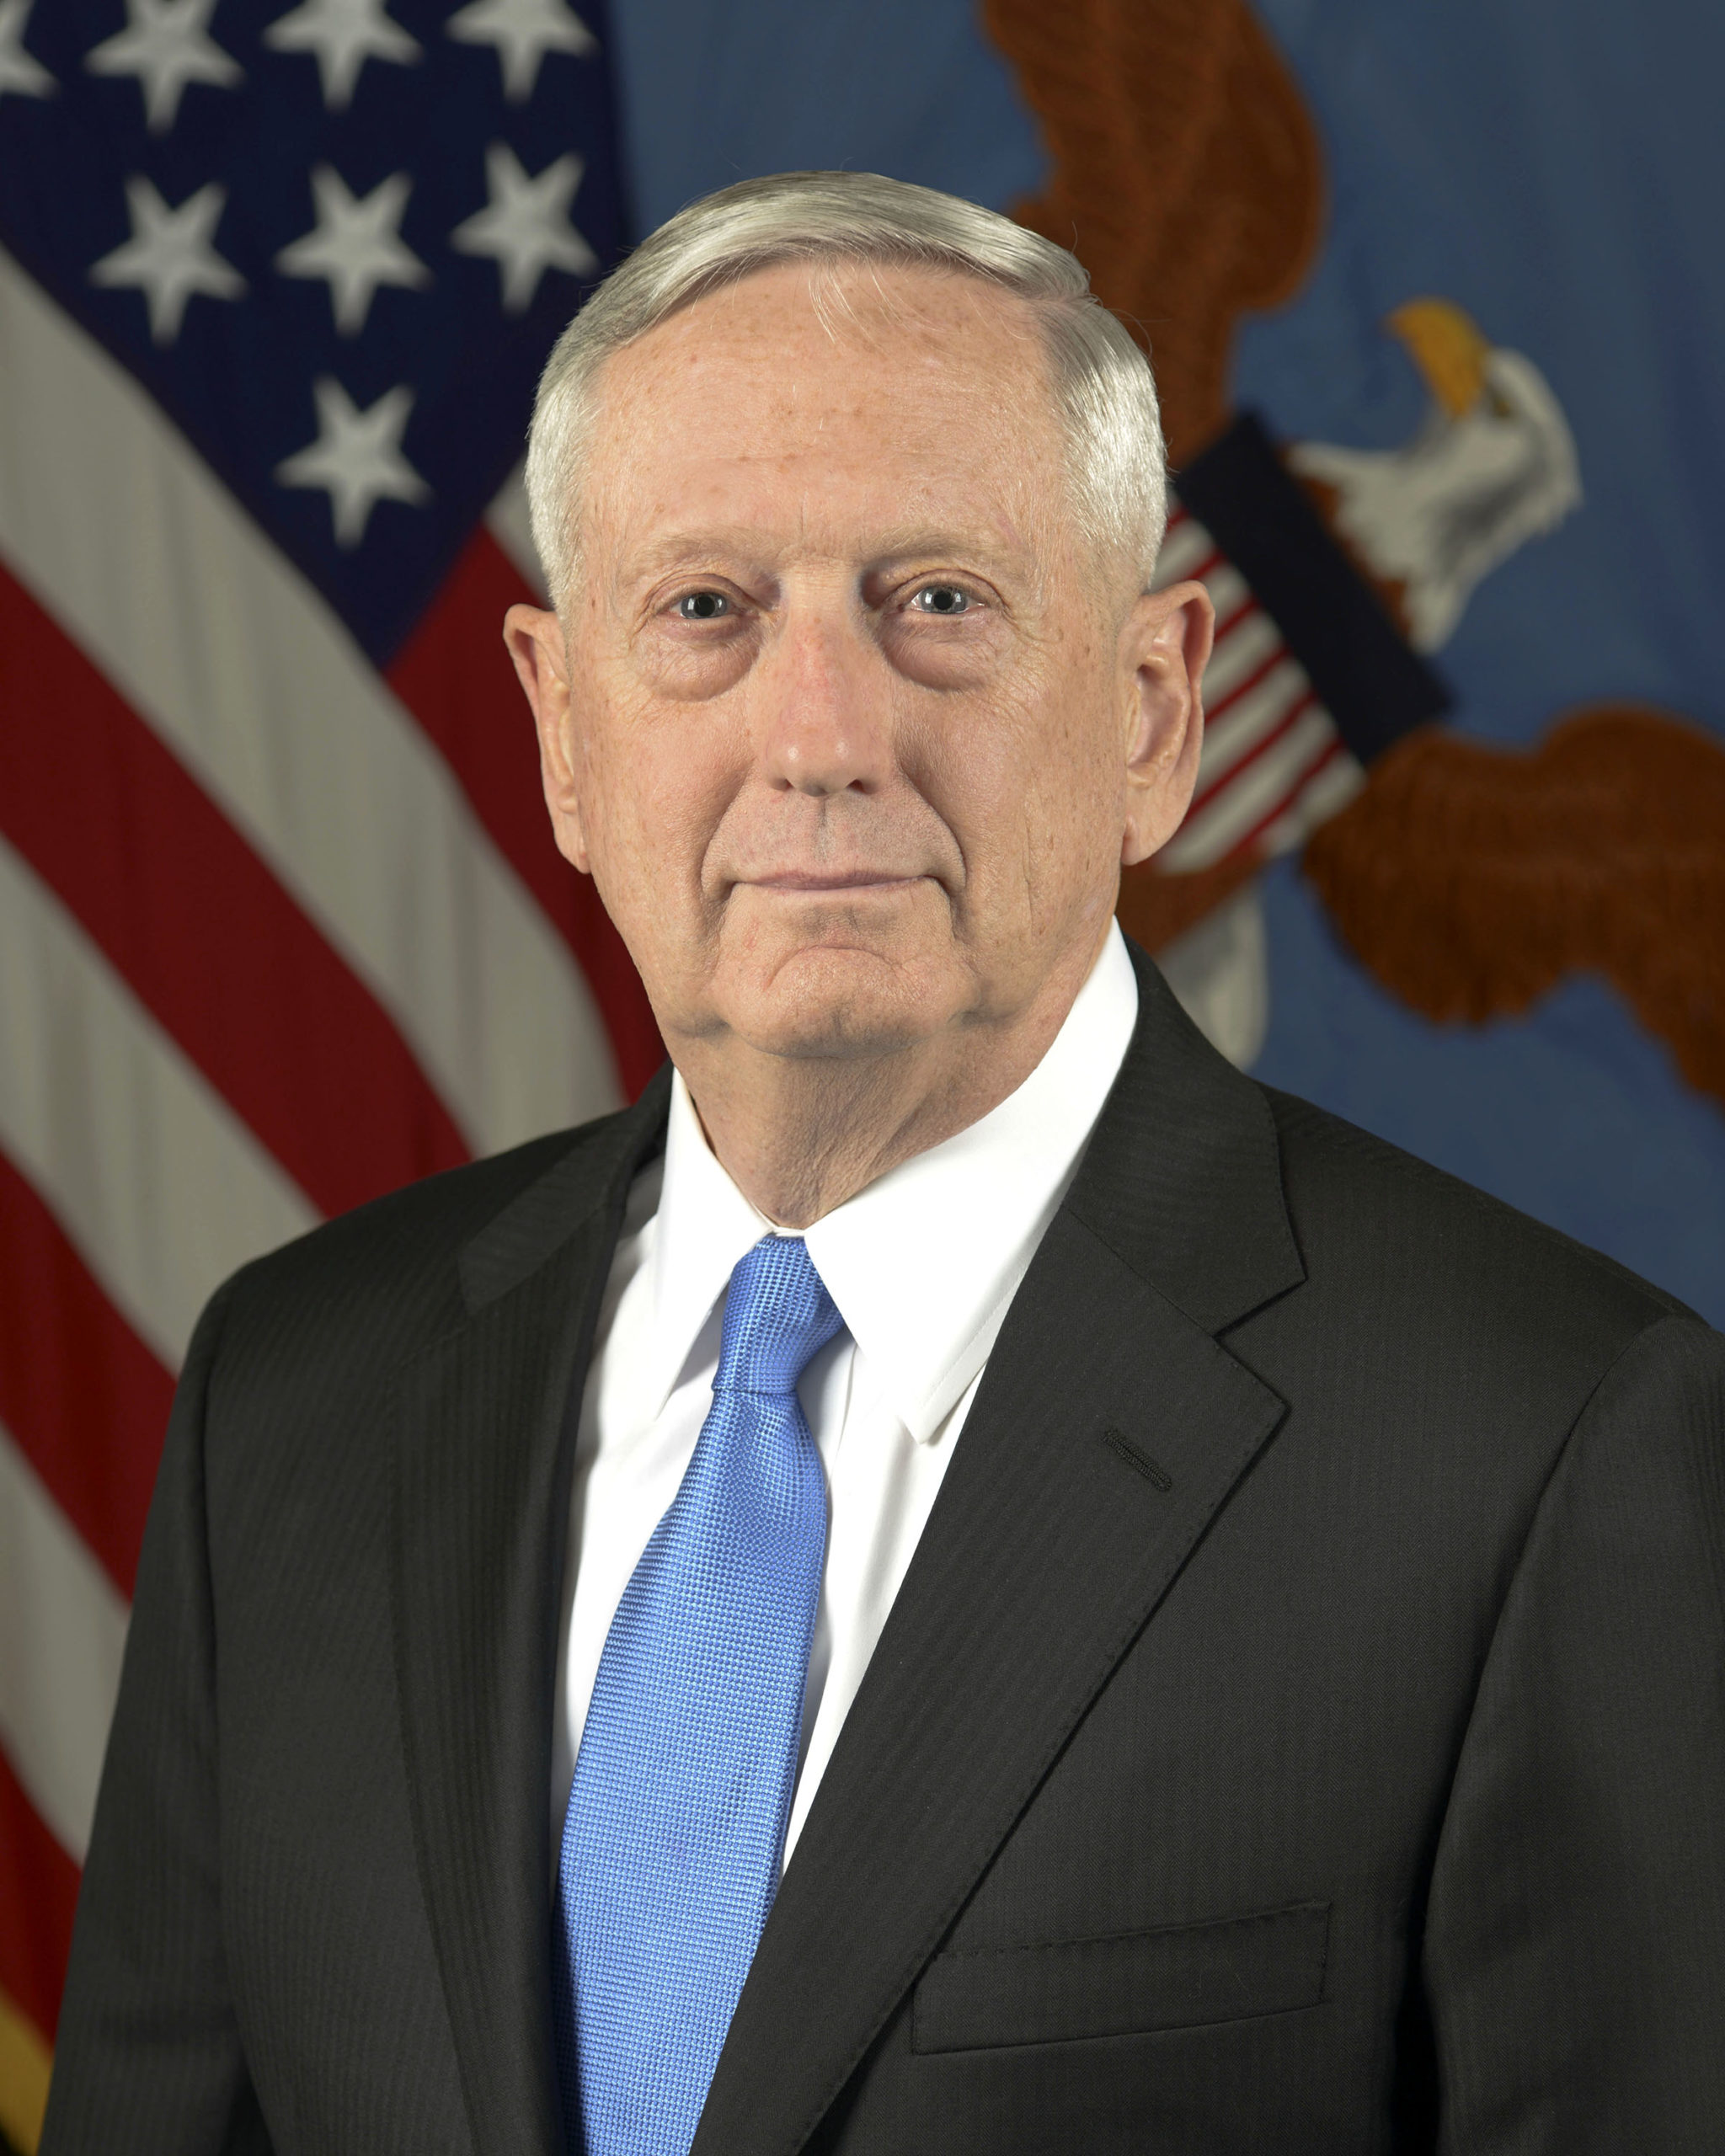 James N. Mattis, the 26th Secretary of Defense, poses for his official portrait in the Army portrait studio at the Pentagon in Arlington, Virginia, Jan 25, 2017. (U.S. Army photo by Monica King/Released)